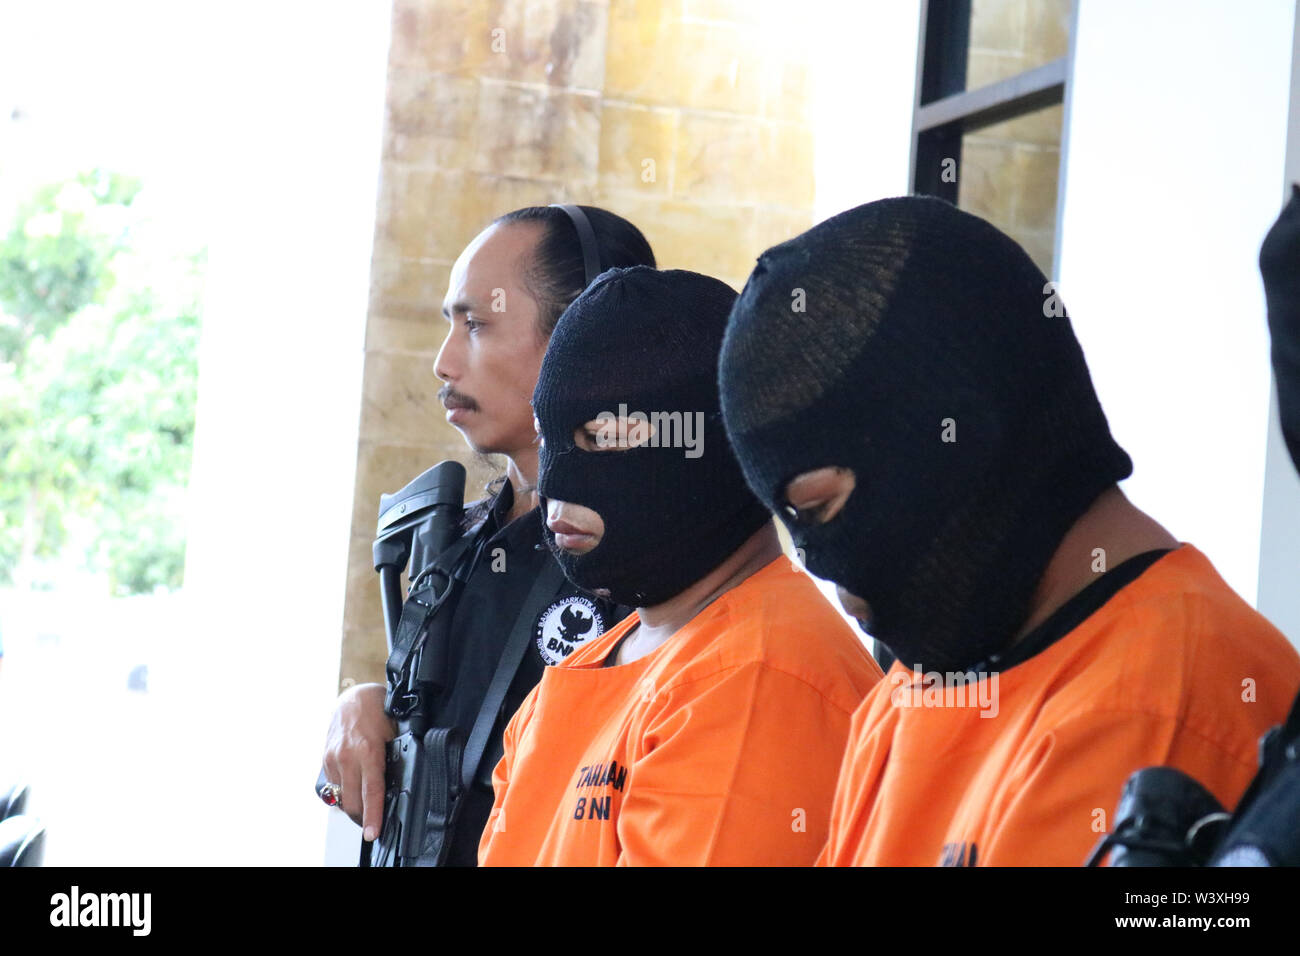 Makassar, Indonesia 18th July 2019, Two farmers who were drug dealers and money launders were wearing detention clothes when they were shown at a press conference at the National Narcotics Agency of the Republic of Indonesia. The two drug dealers were arrested in Sidrap Regency with cash and evidence worth 16 billion rupiah. Credit: Herwin Bahar / Alamy Live News Stock Photo